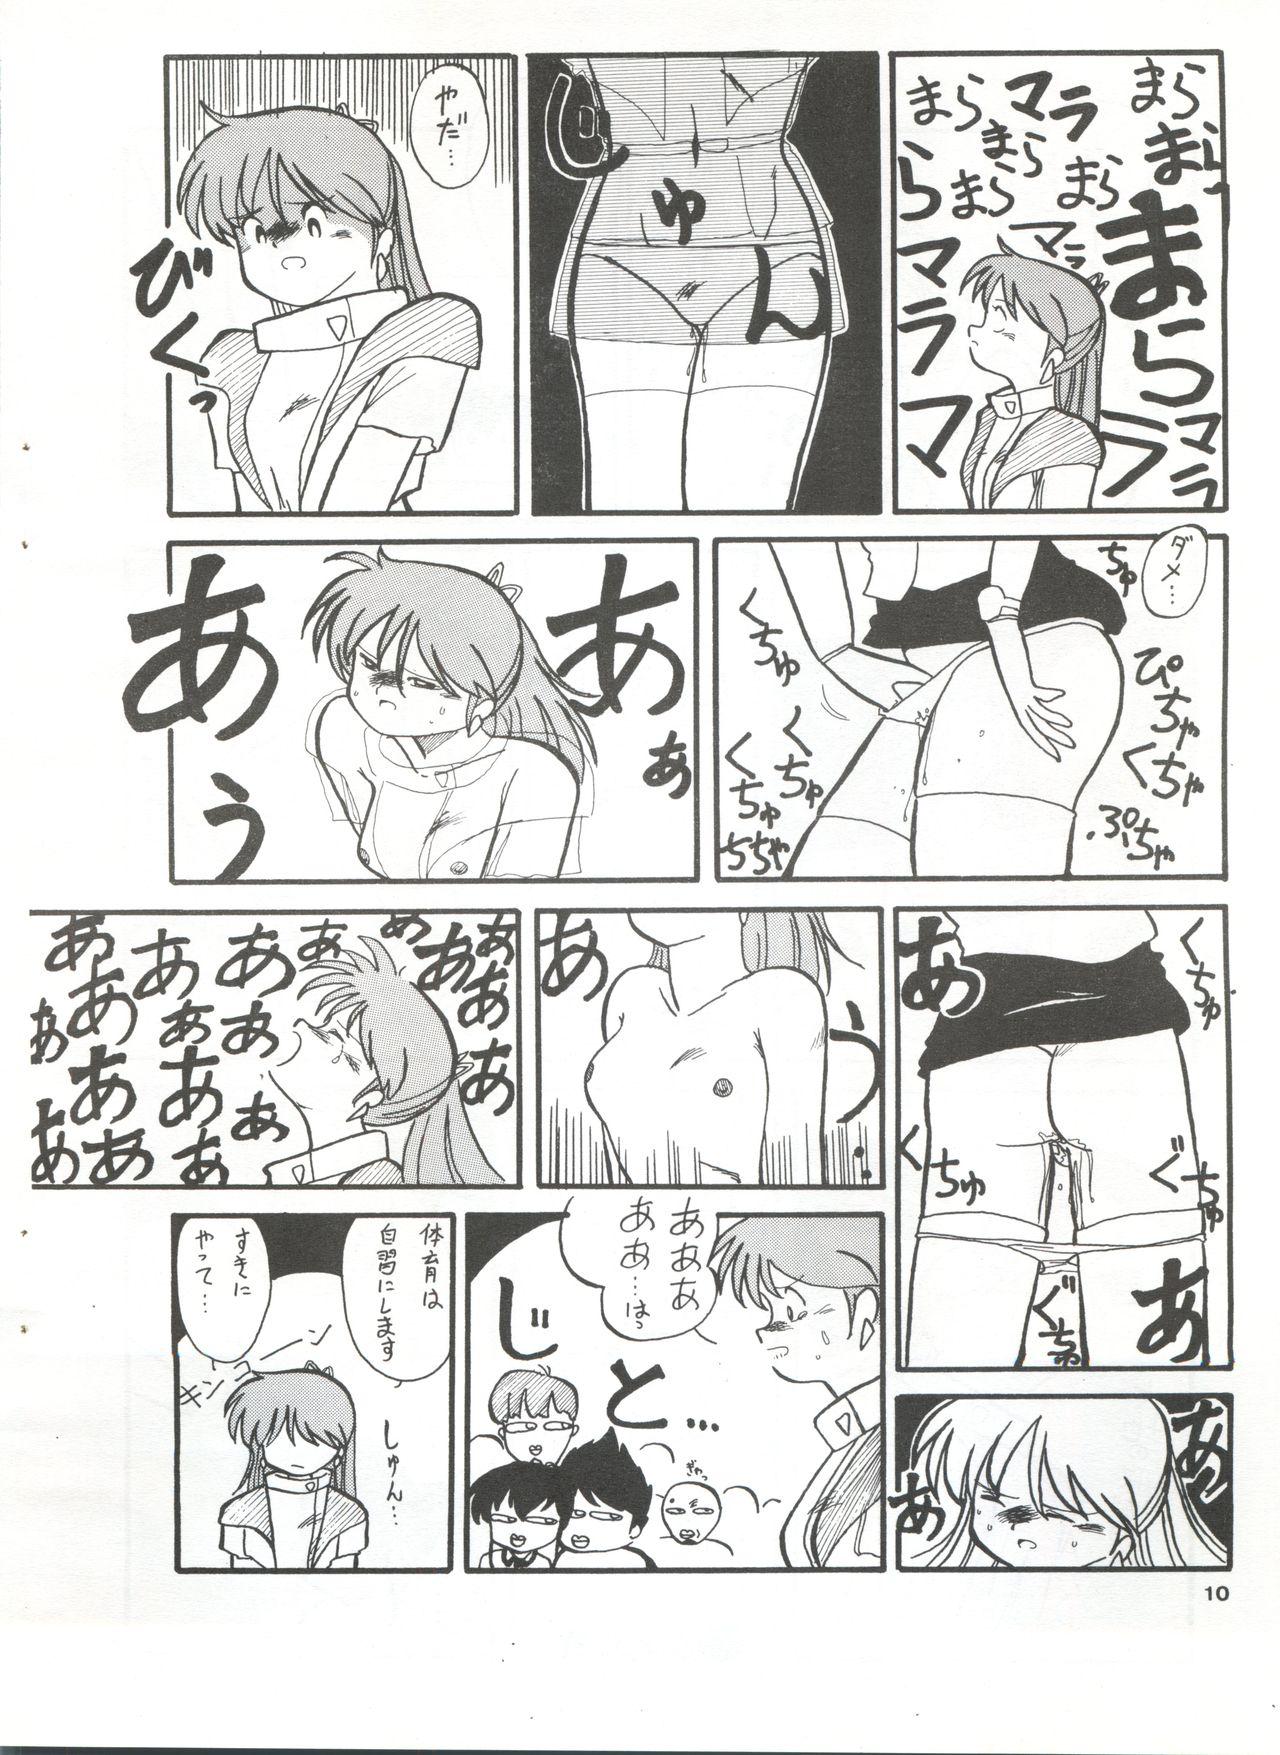 Seduction Porn YATTE! YATTE! Mission 1 - Dirty pair Sonic soldier borgman Fucked Hard - Page 9